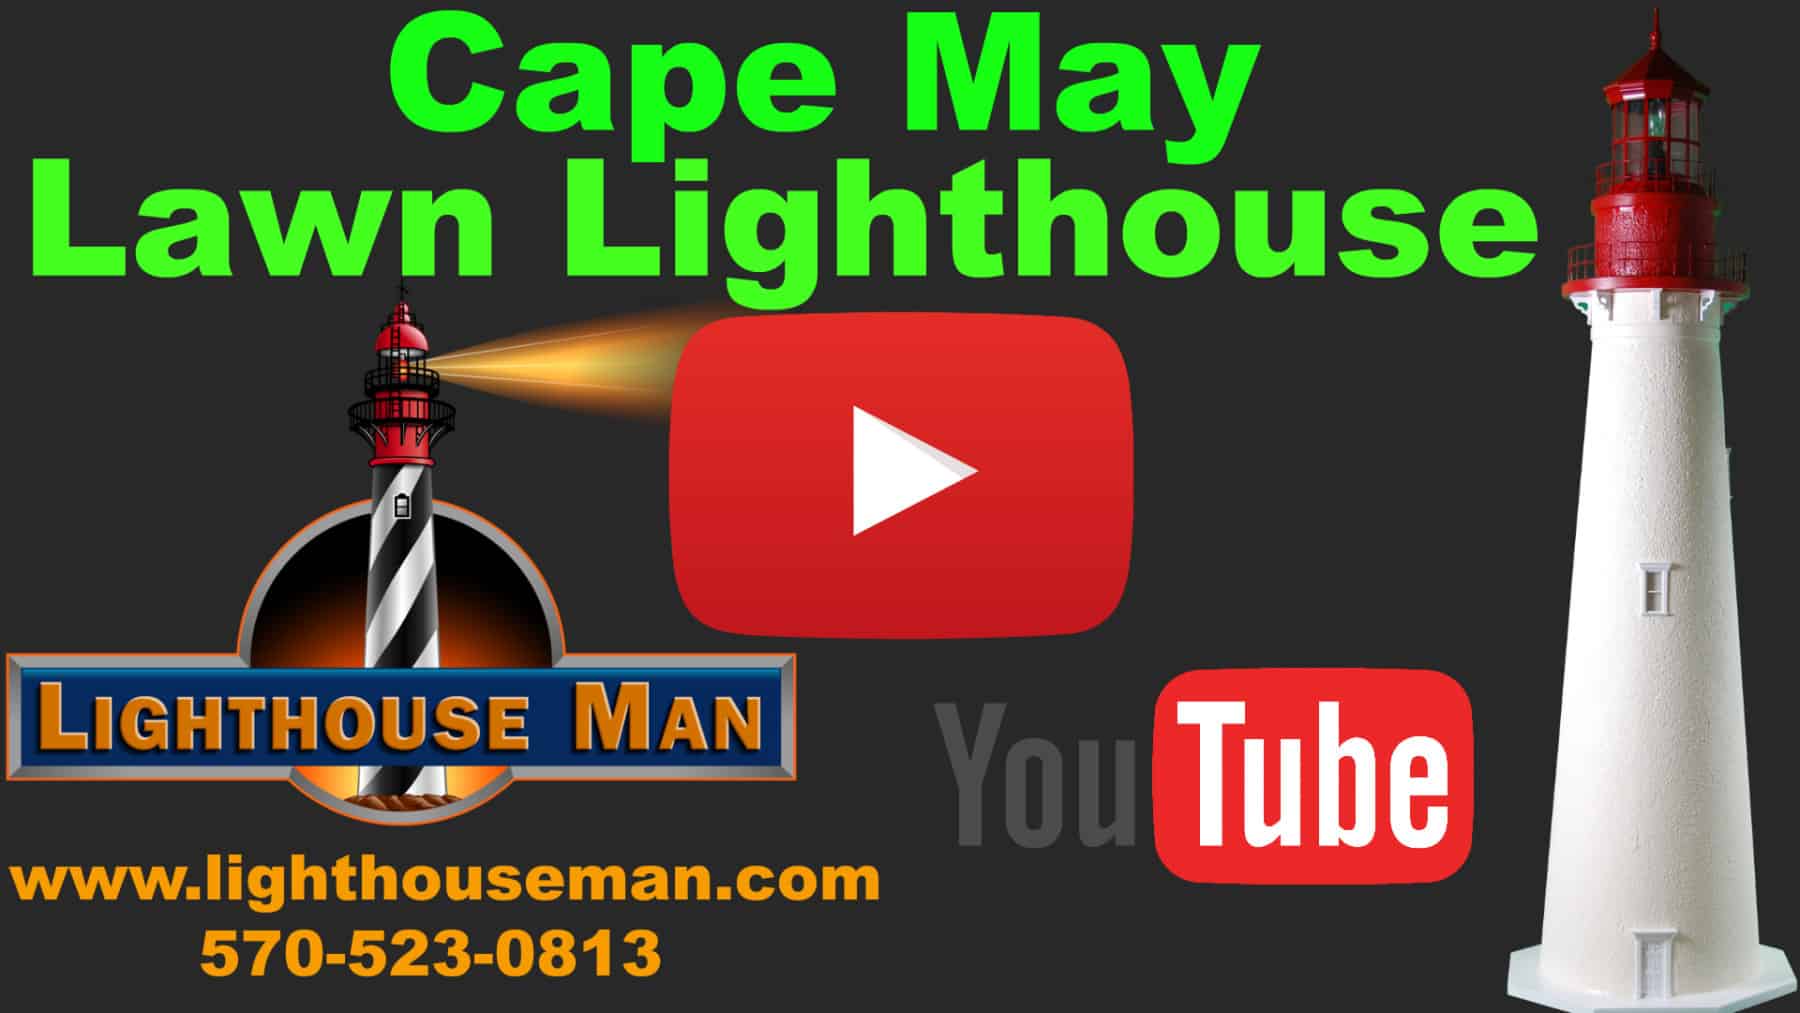 Cape May Yard Lighthouse You Tube Video Intro